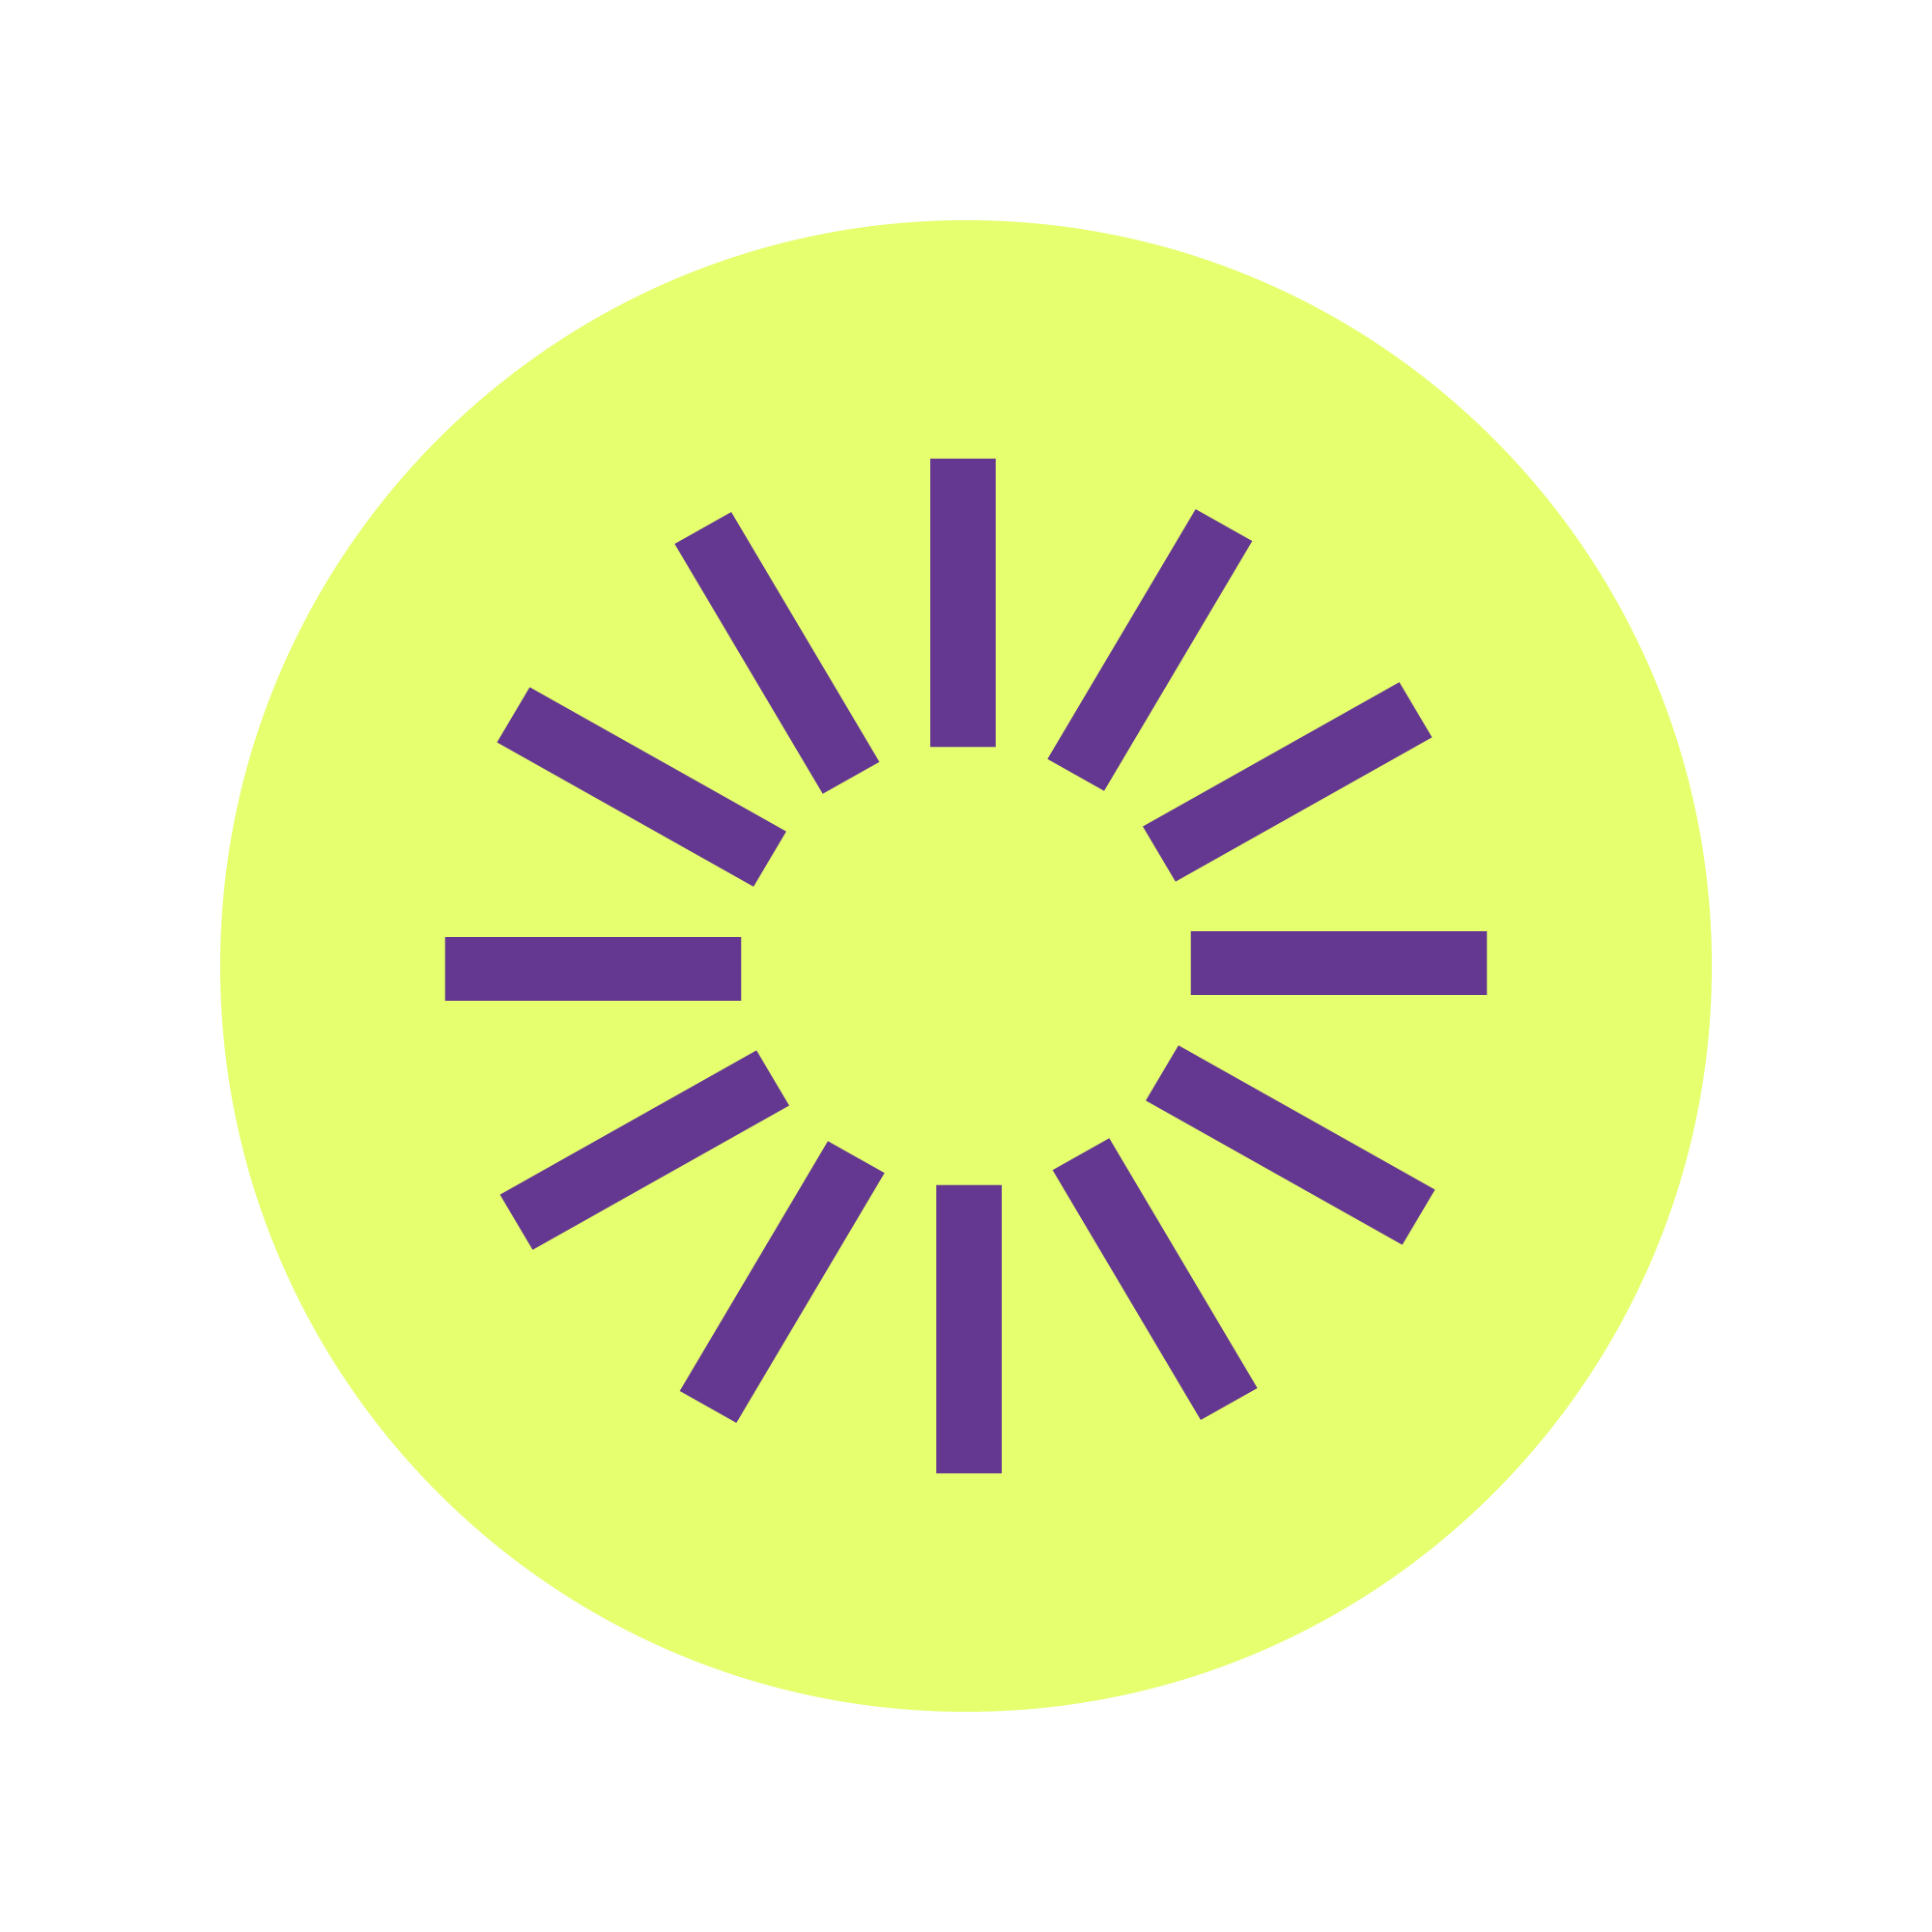 Lime green circle with purple buffering lines